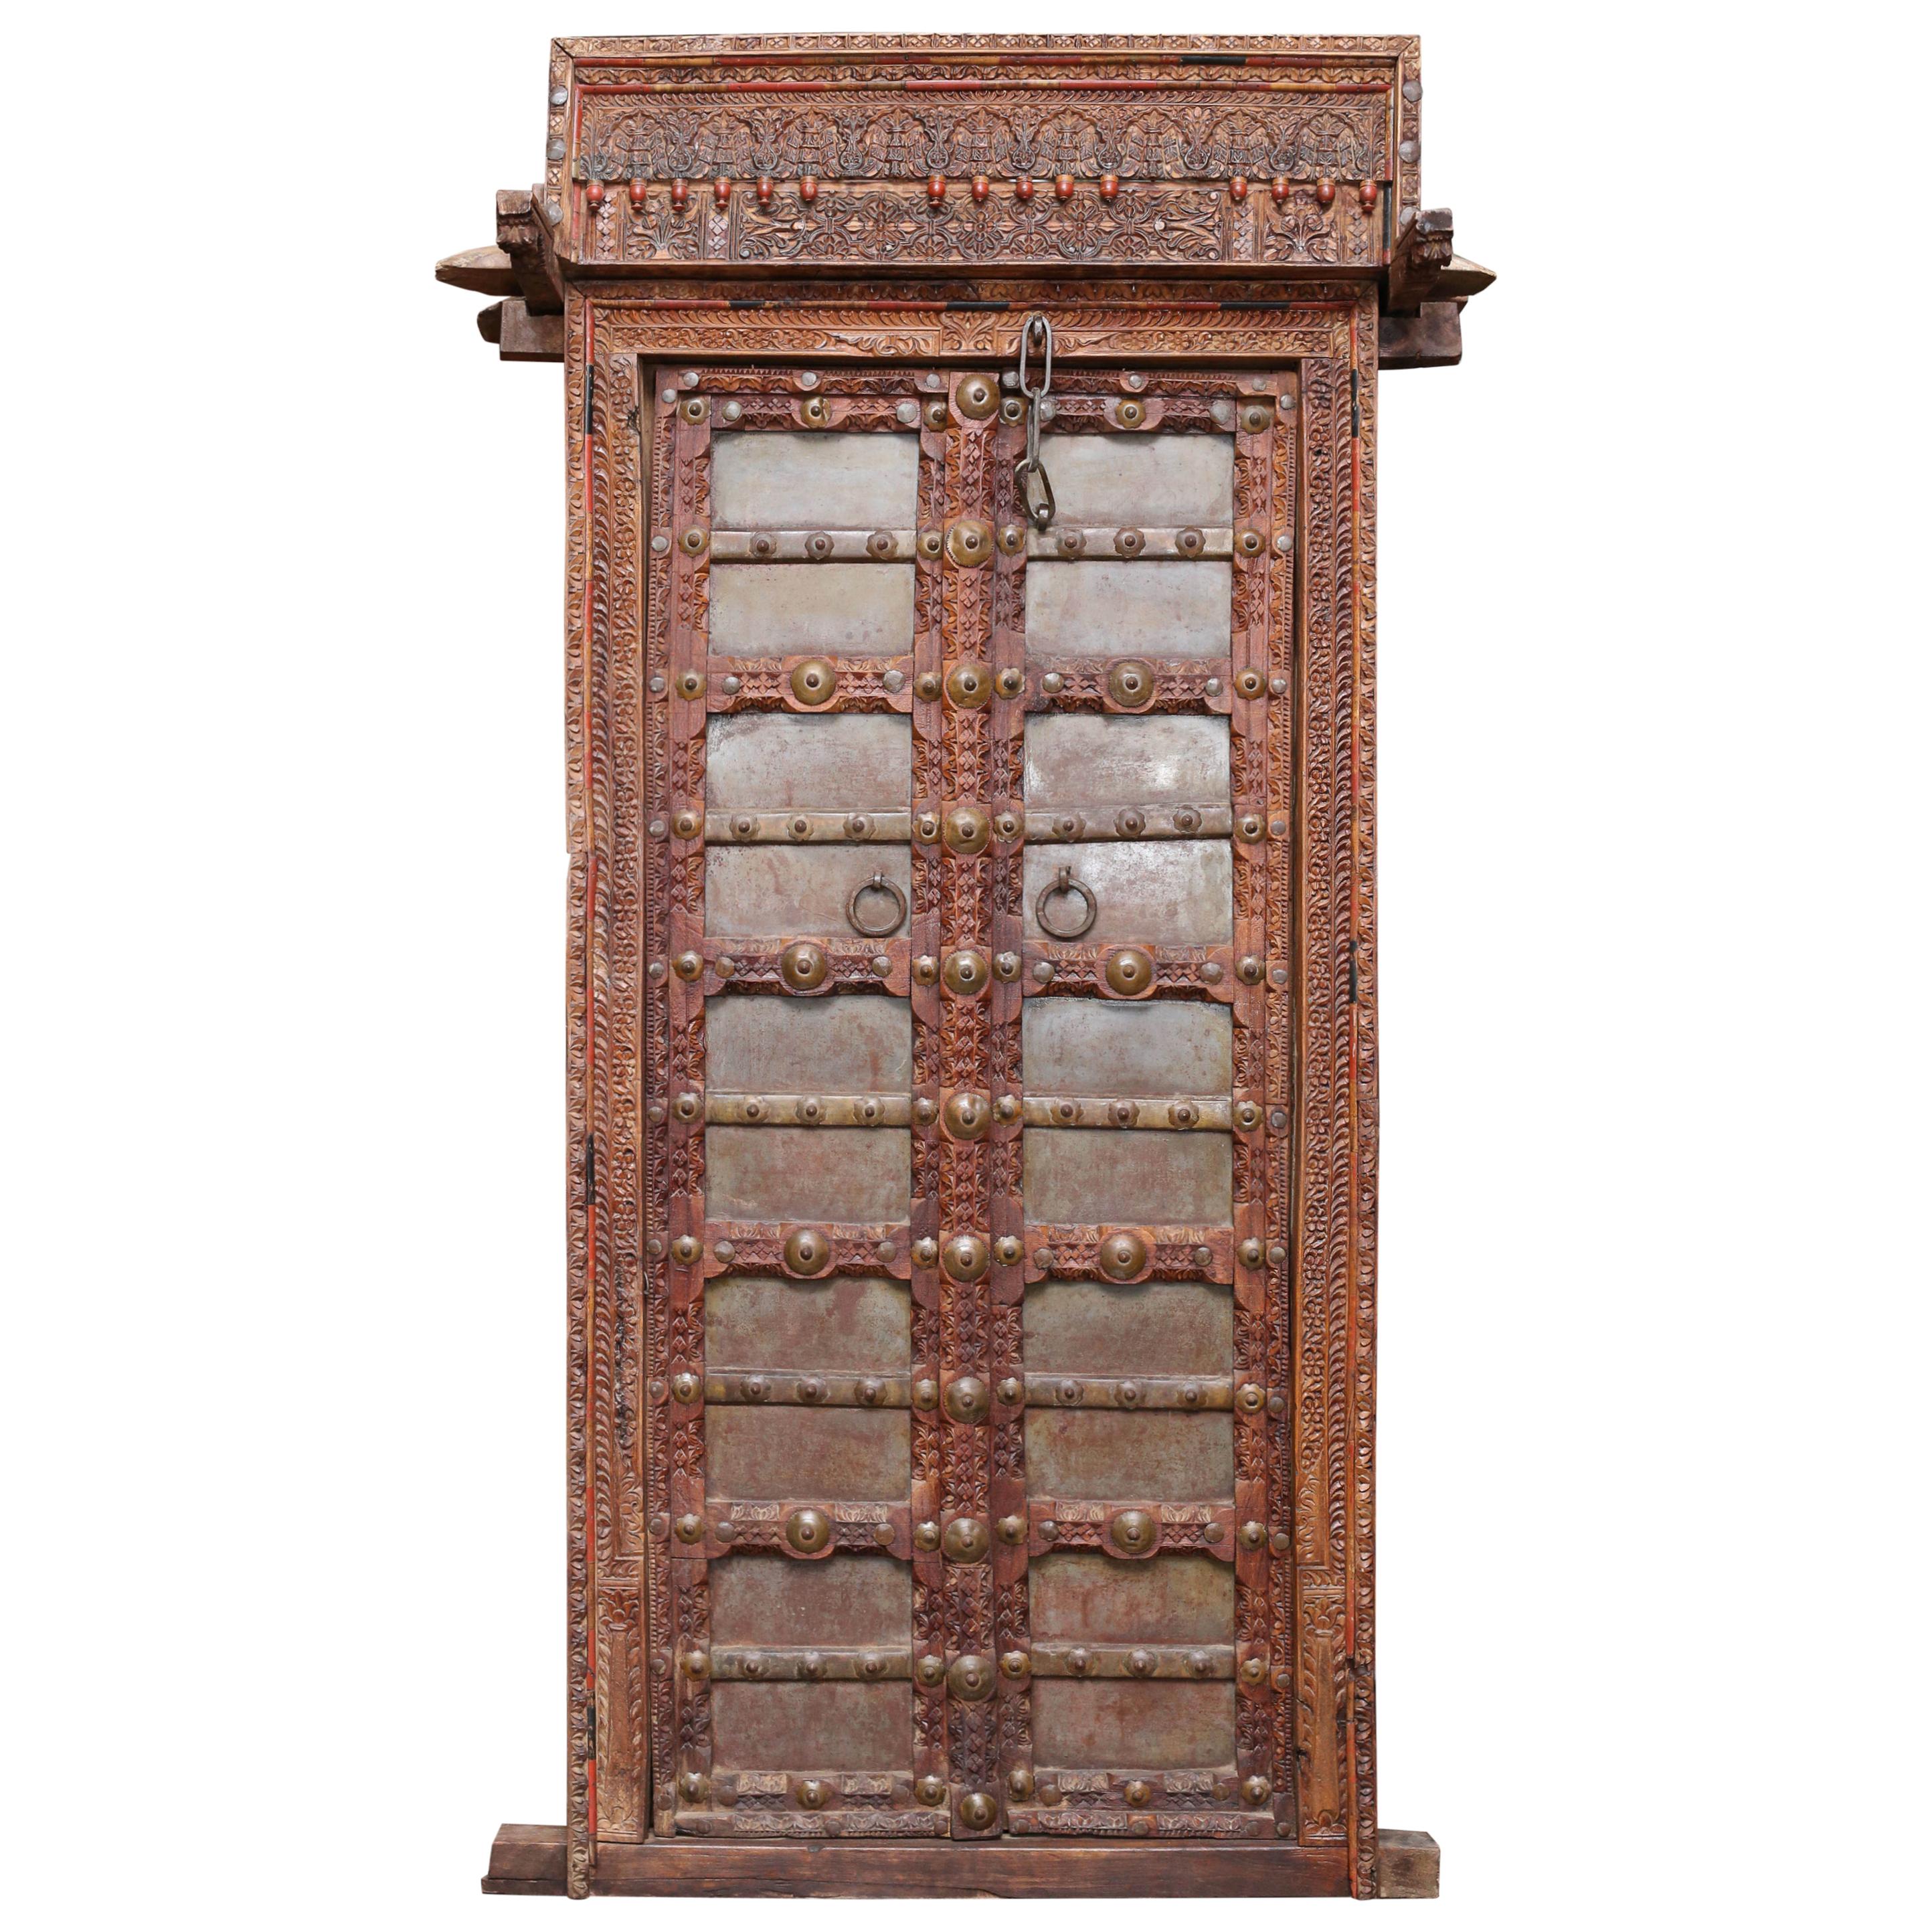 1810s Solid Teak Wood and Metal Works Kitchen Door from the Farm House in Goa